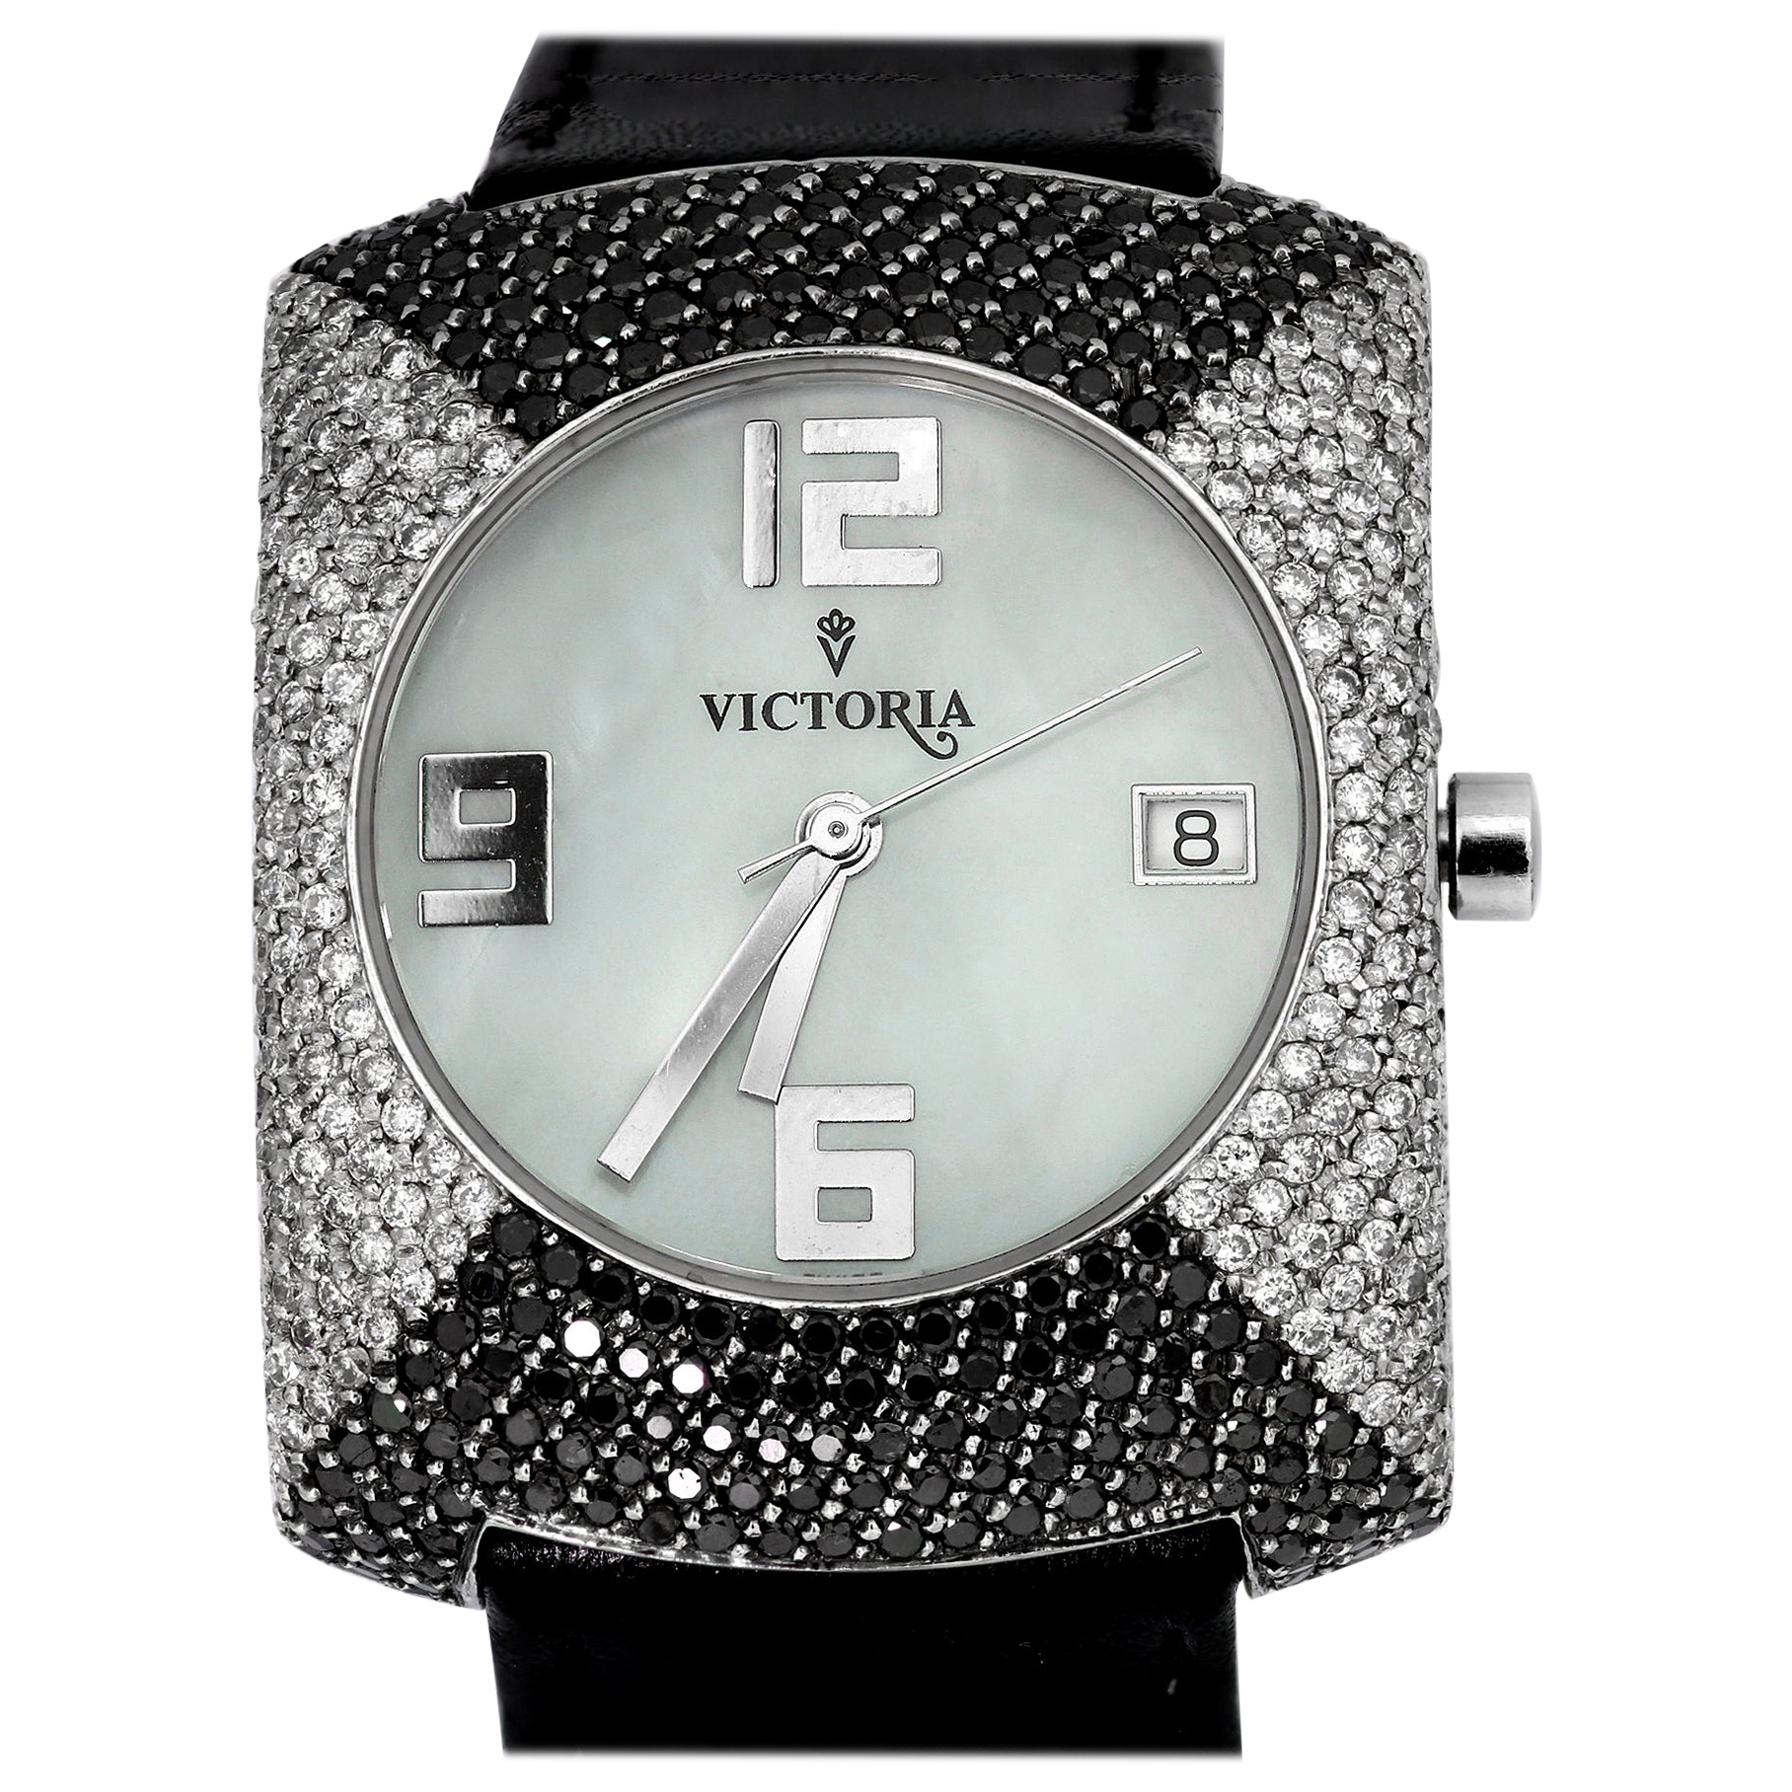 Victoria Strap Watch, Black and White Diamonds, Ladies, Mother of Pearl, Swiss For Sale